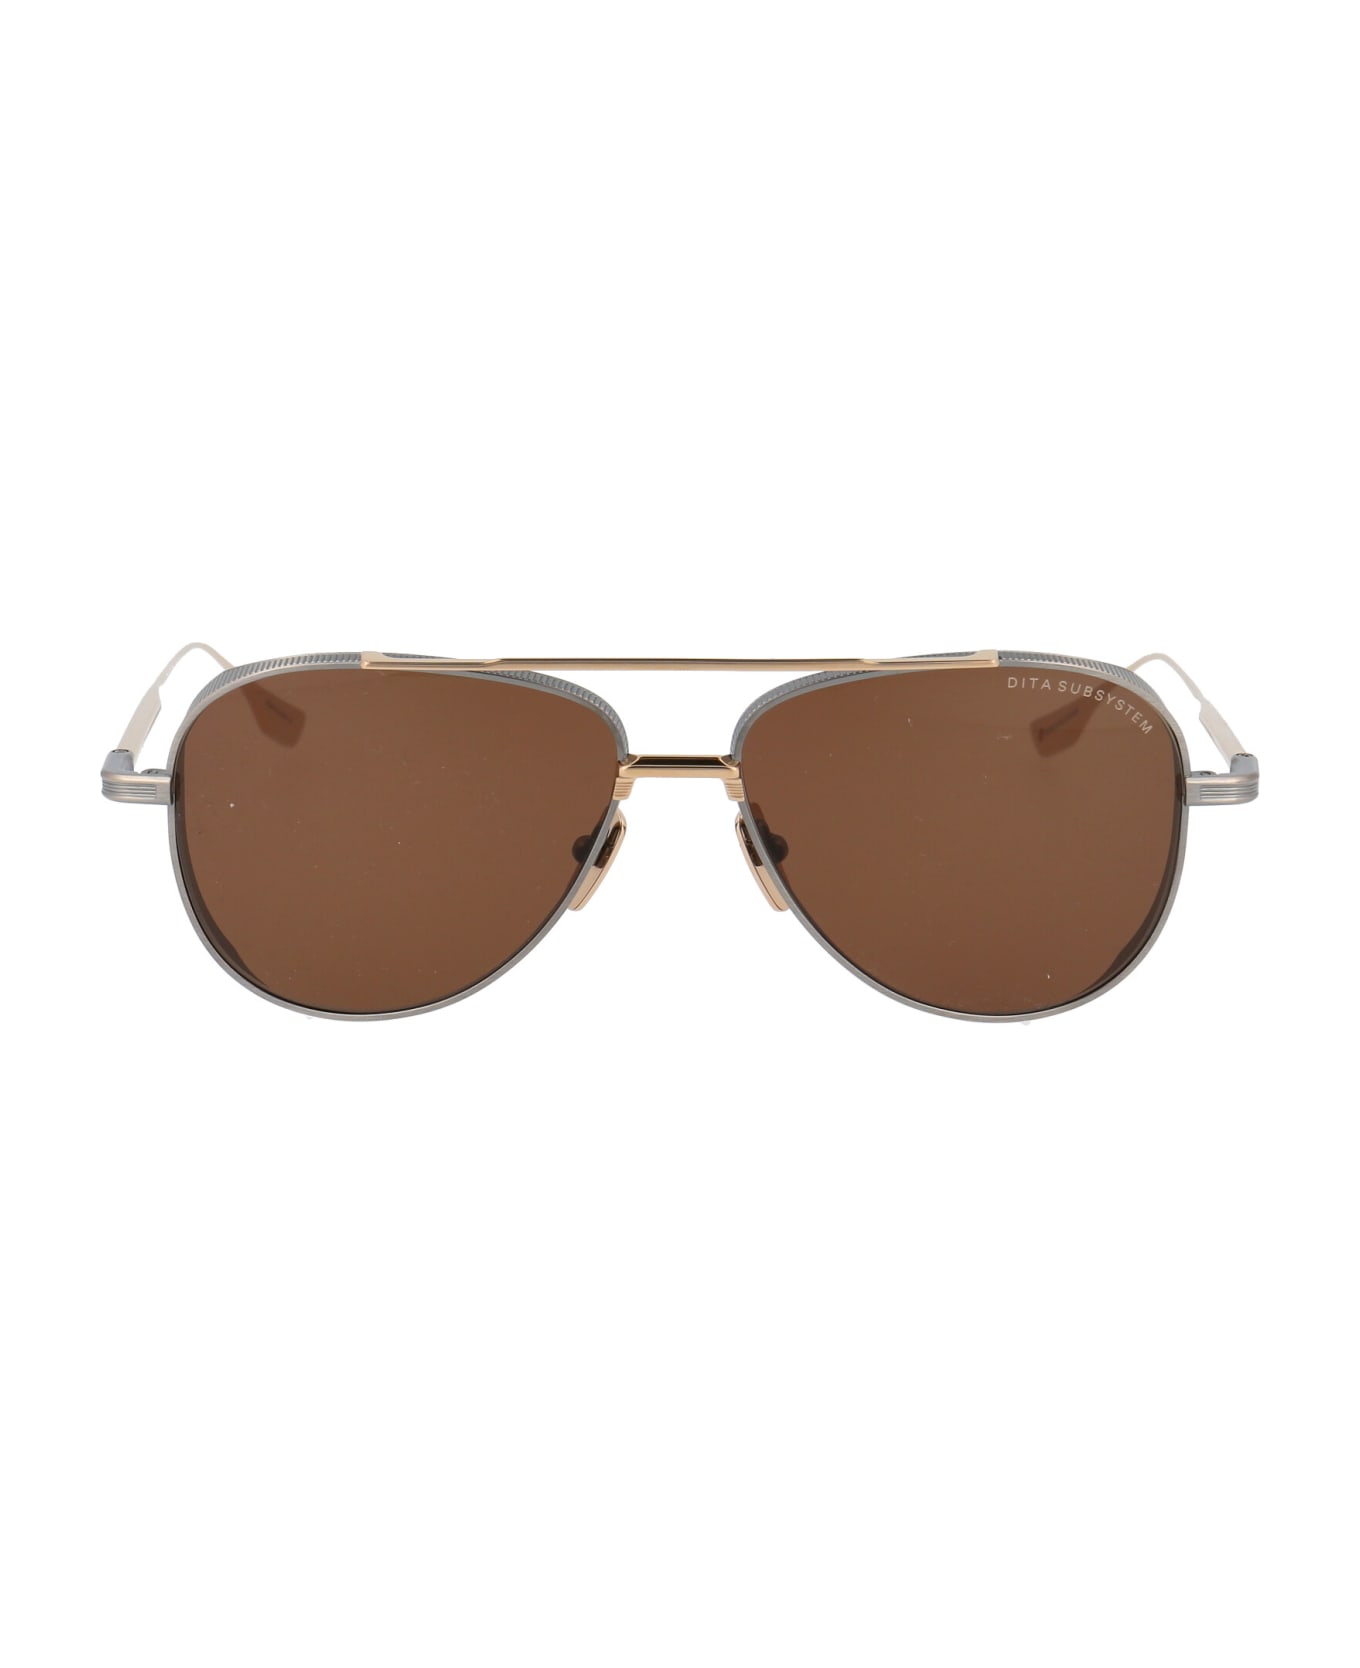 Dita Subsystem Sunglasses - Antique Silver - White Gold